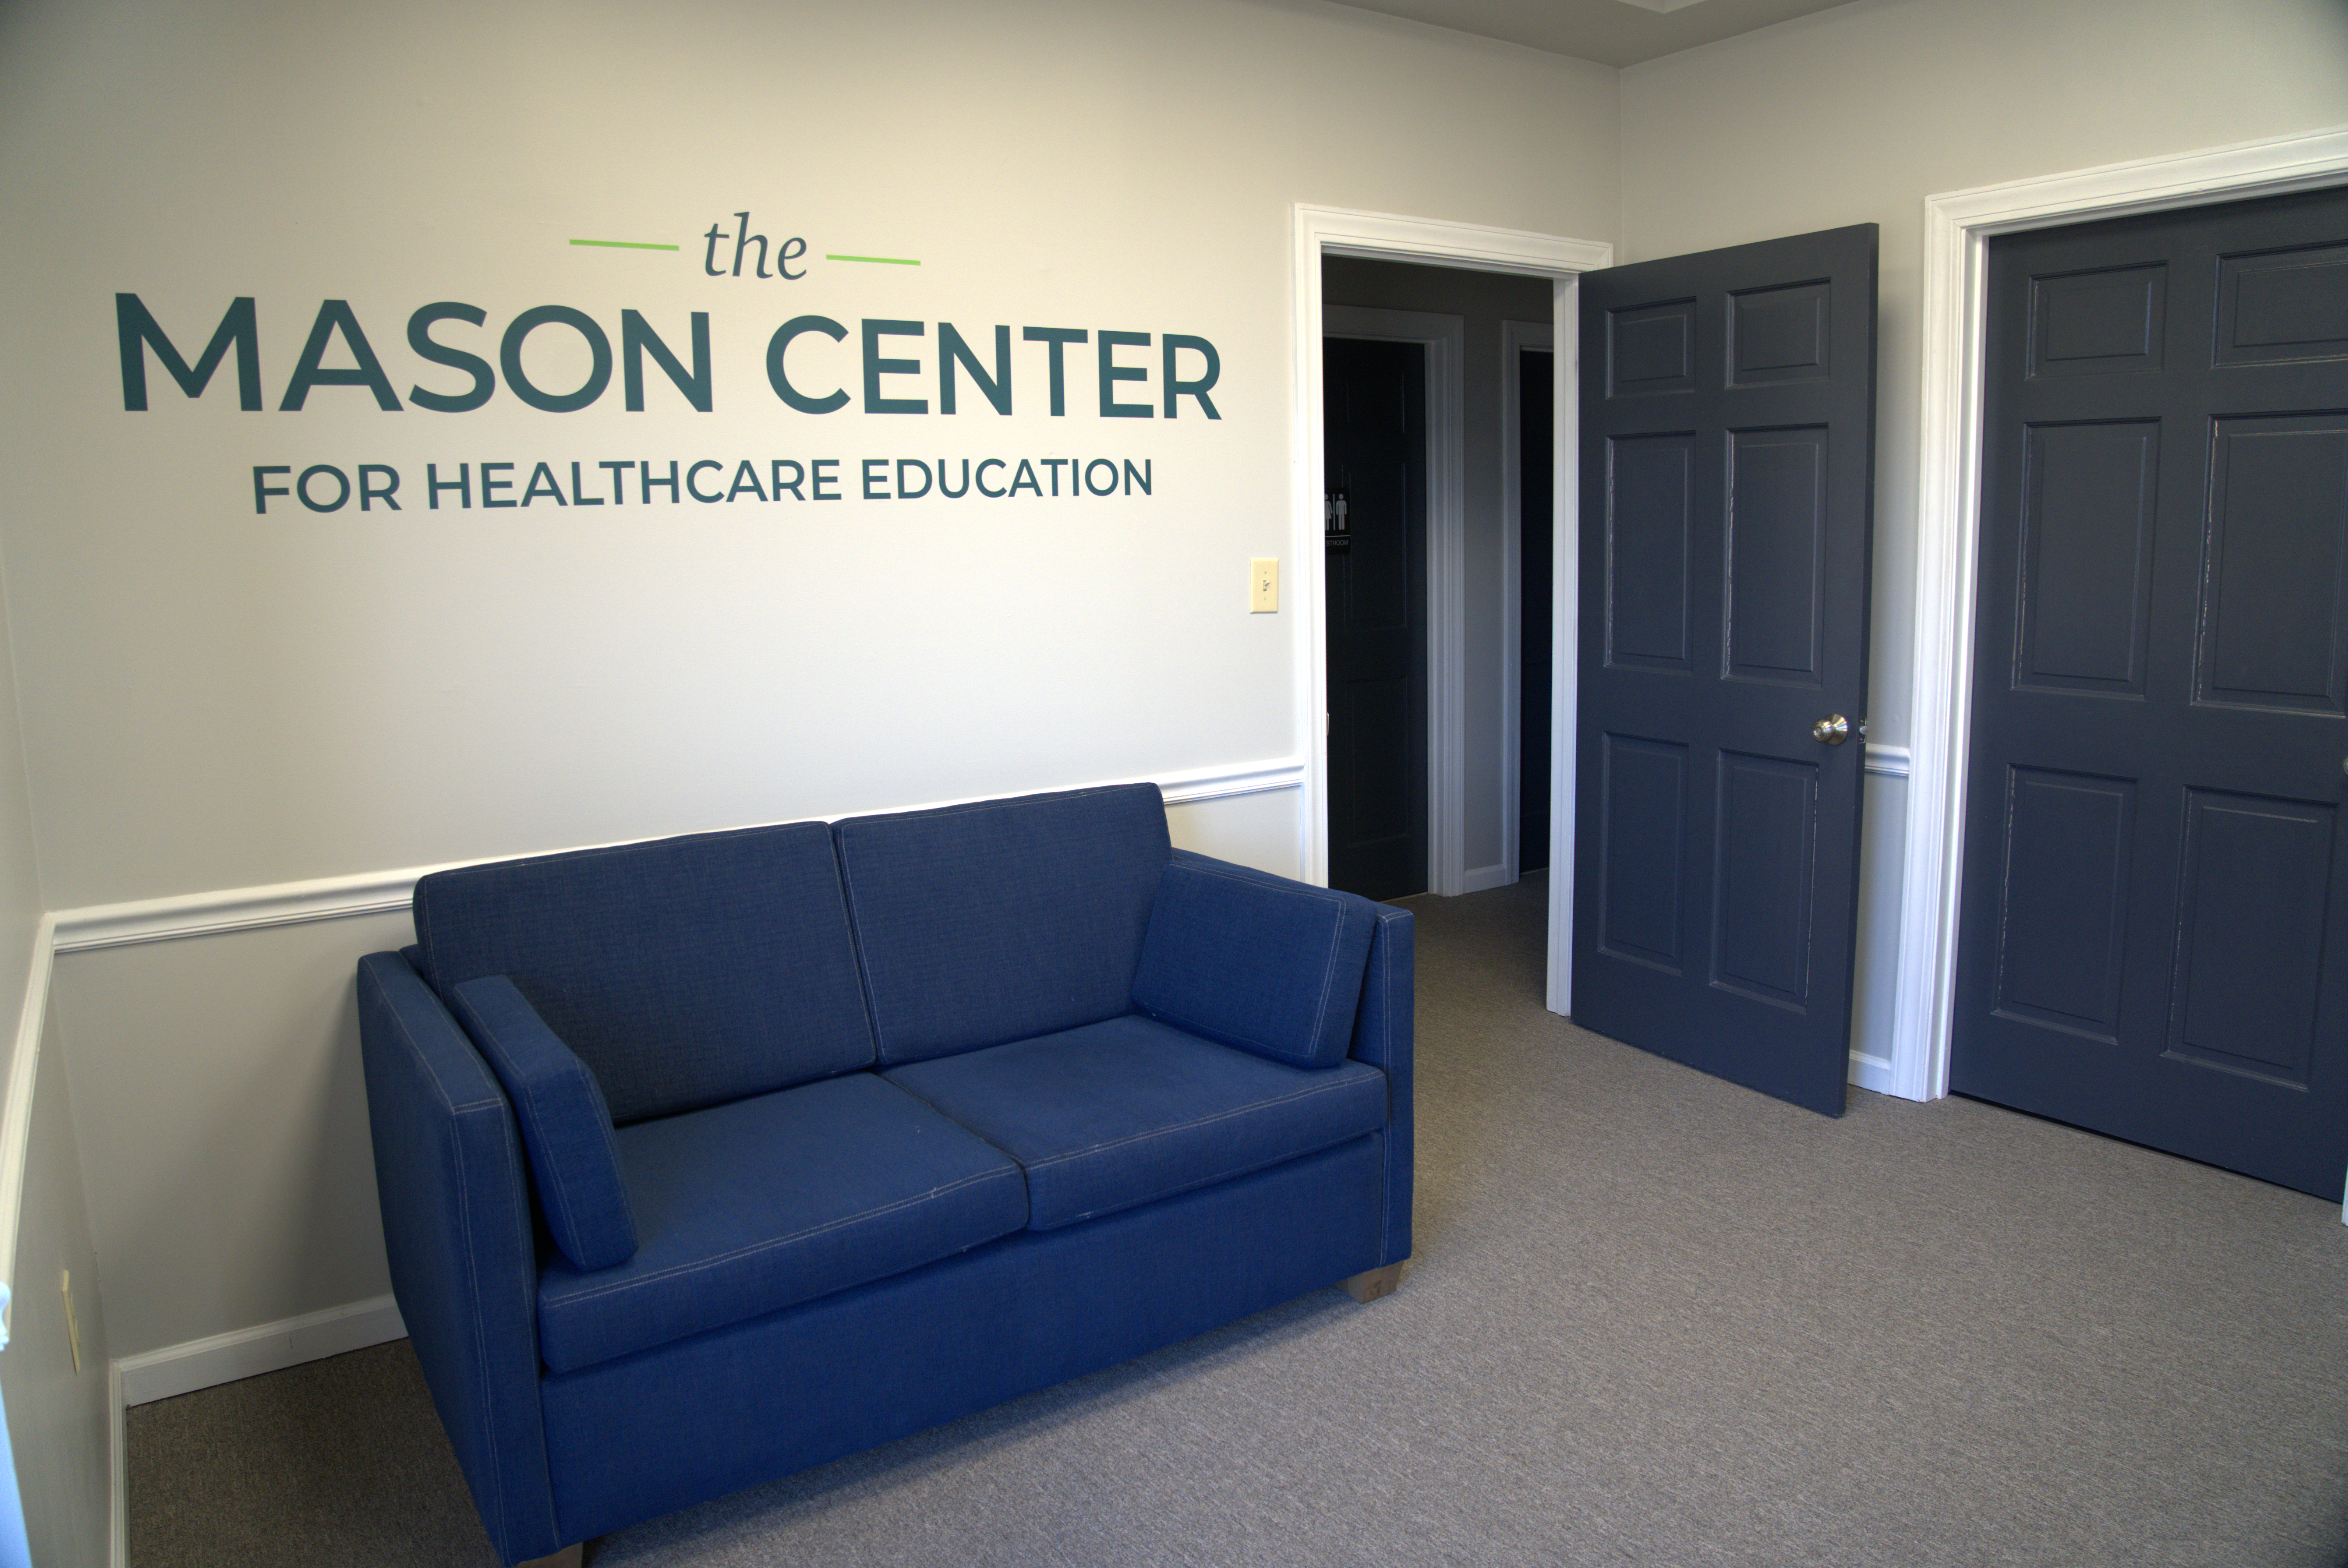 Featured image for “The Mason Center for Healthcare Education Announces Its Grand Opening and Ribbon Cutting Ceremony”